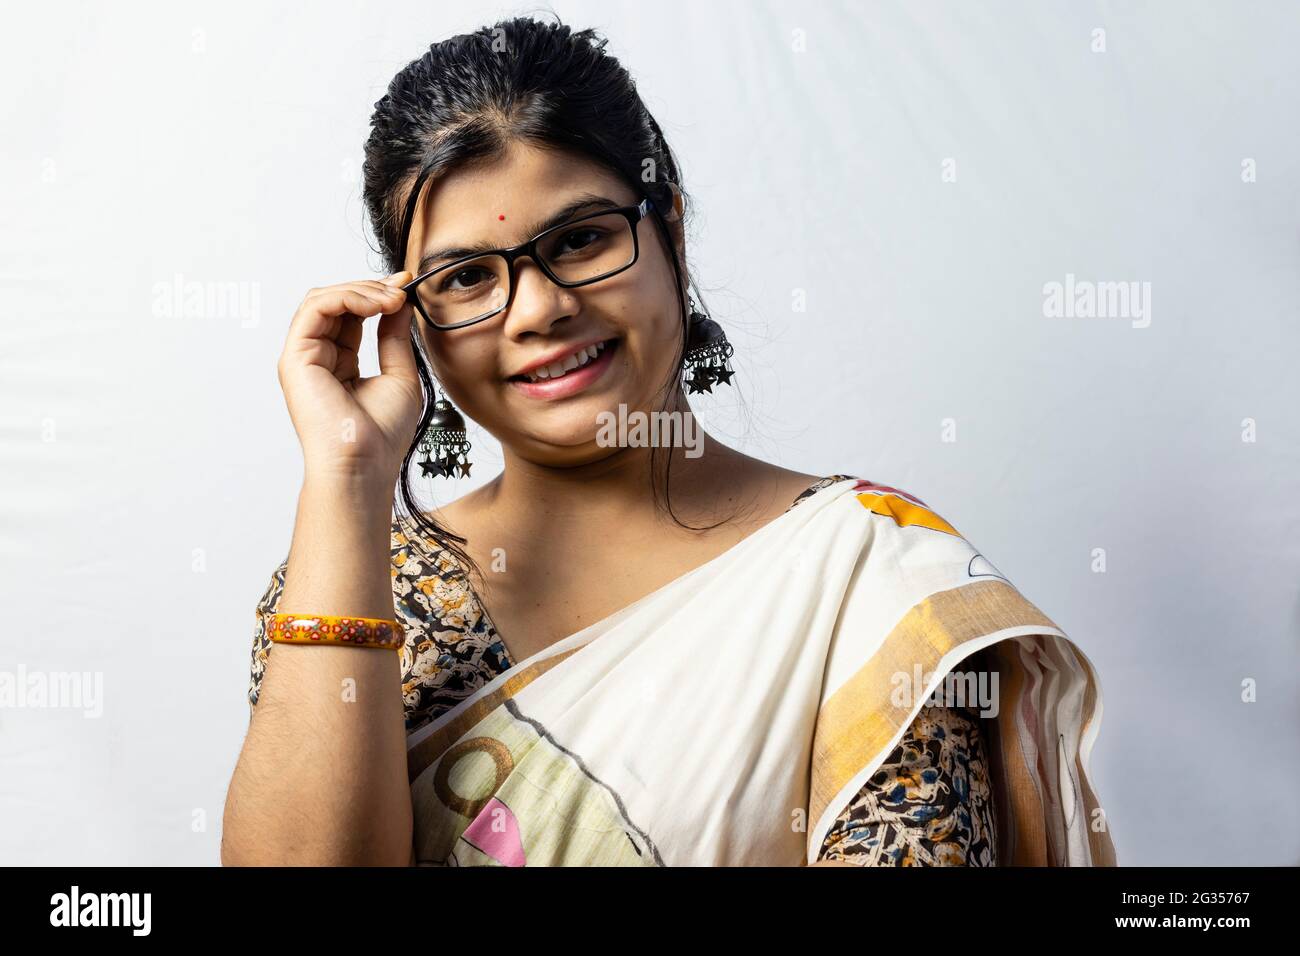 Isolated on white background an Indian office woman in saree holding her eyeglasses Stock Photo